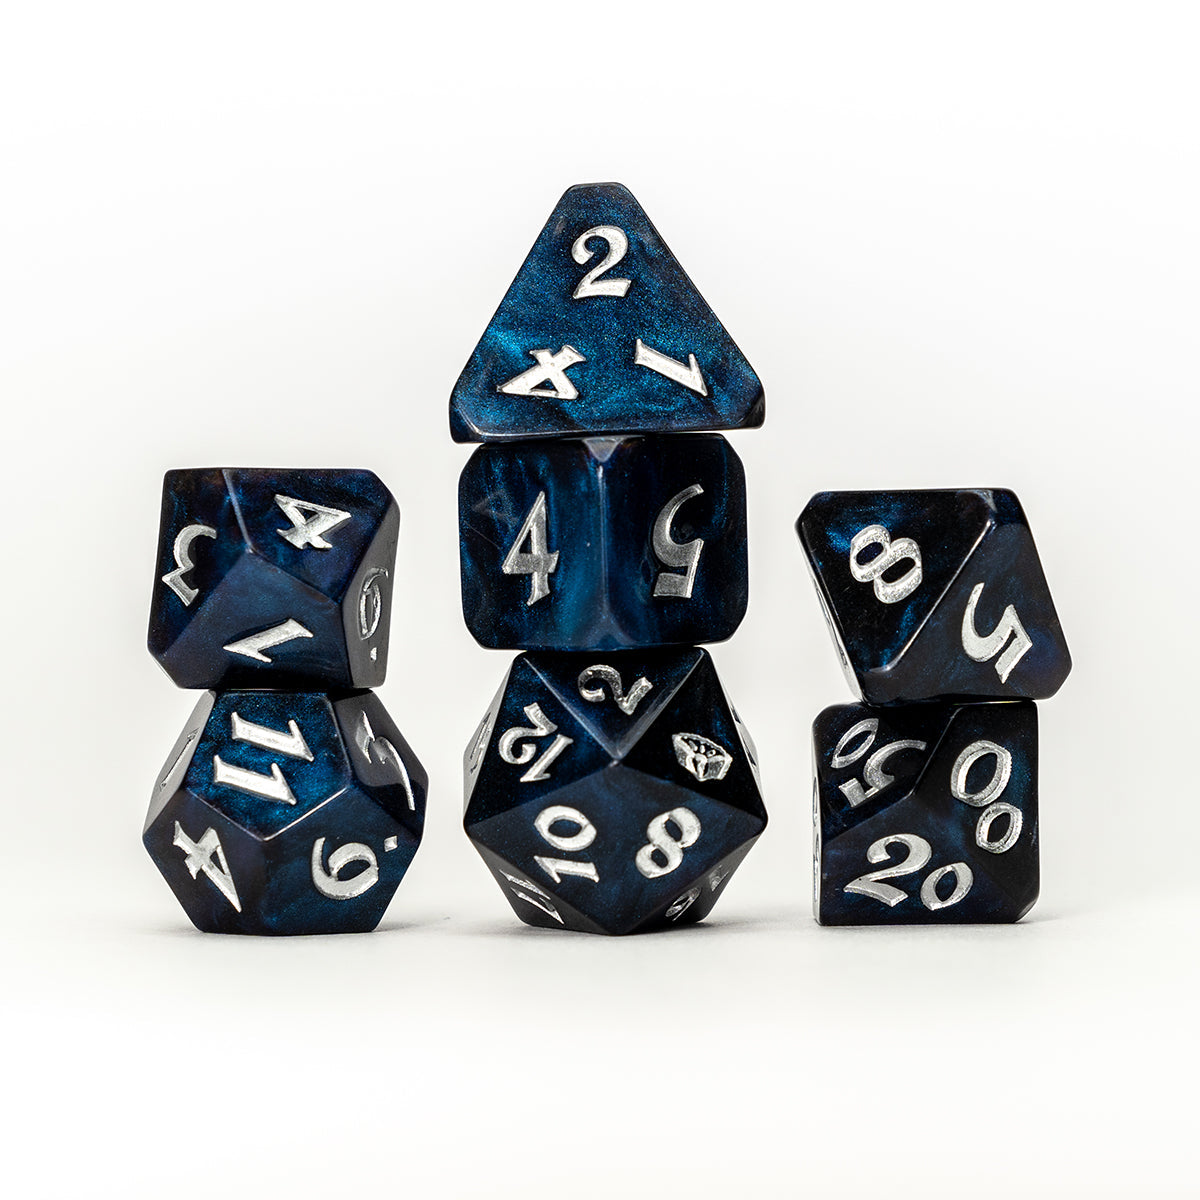 Critical Role Vox Machina inspired dice set and dice bag for the GM